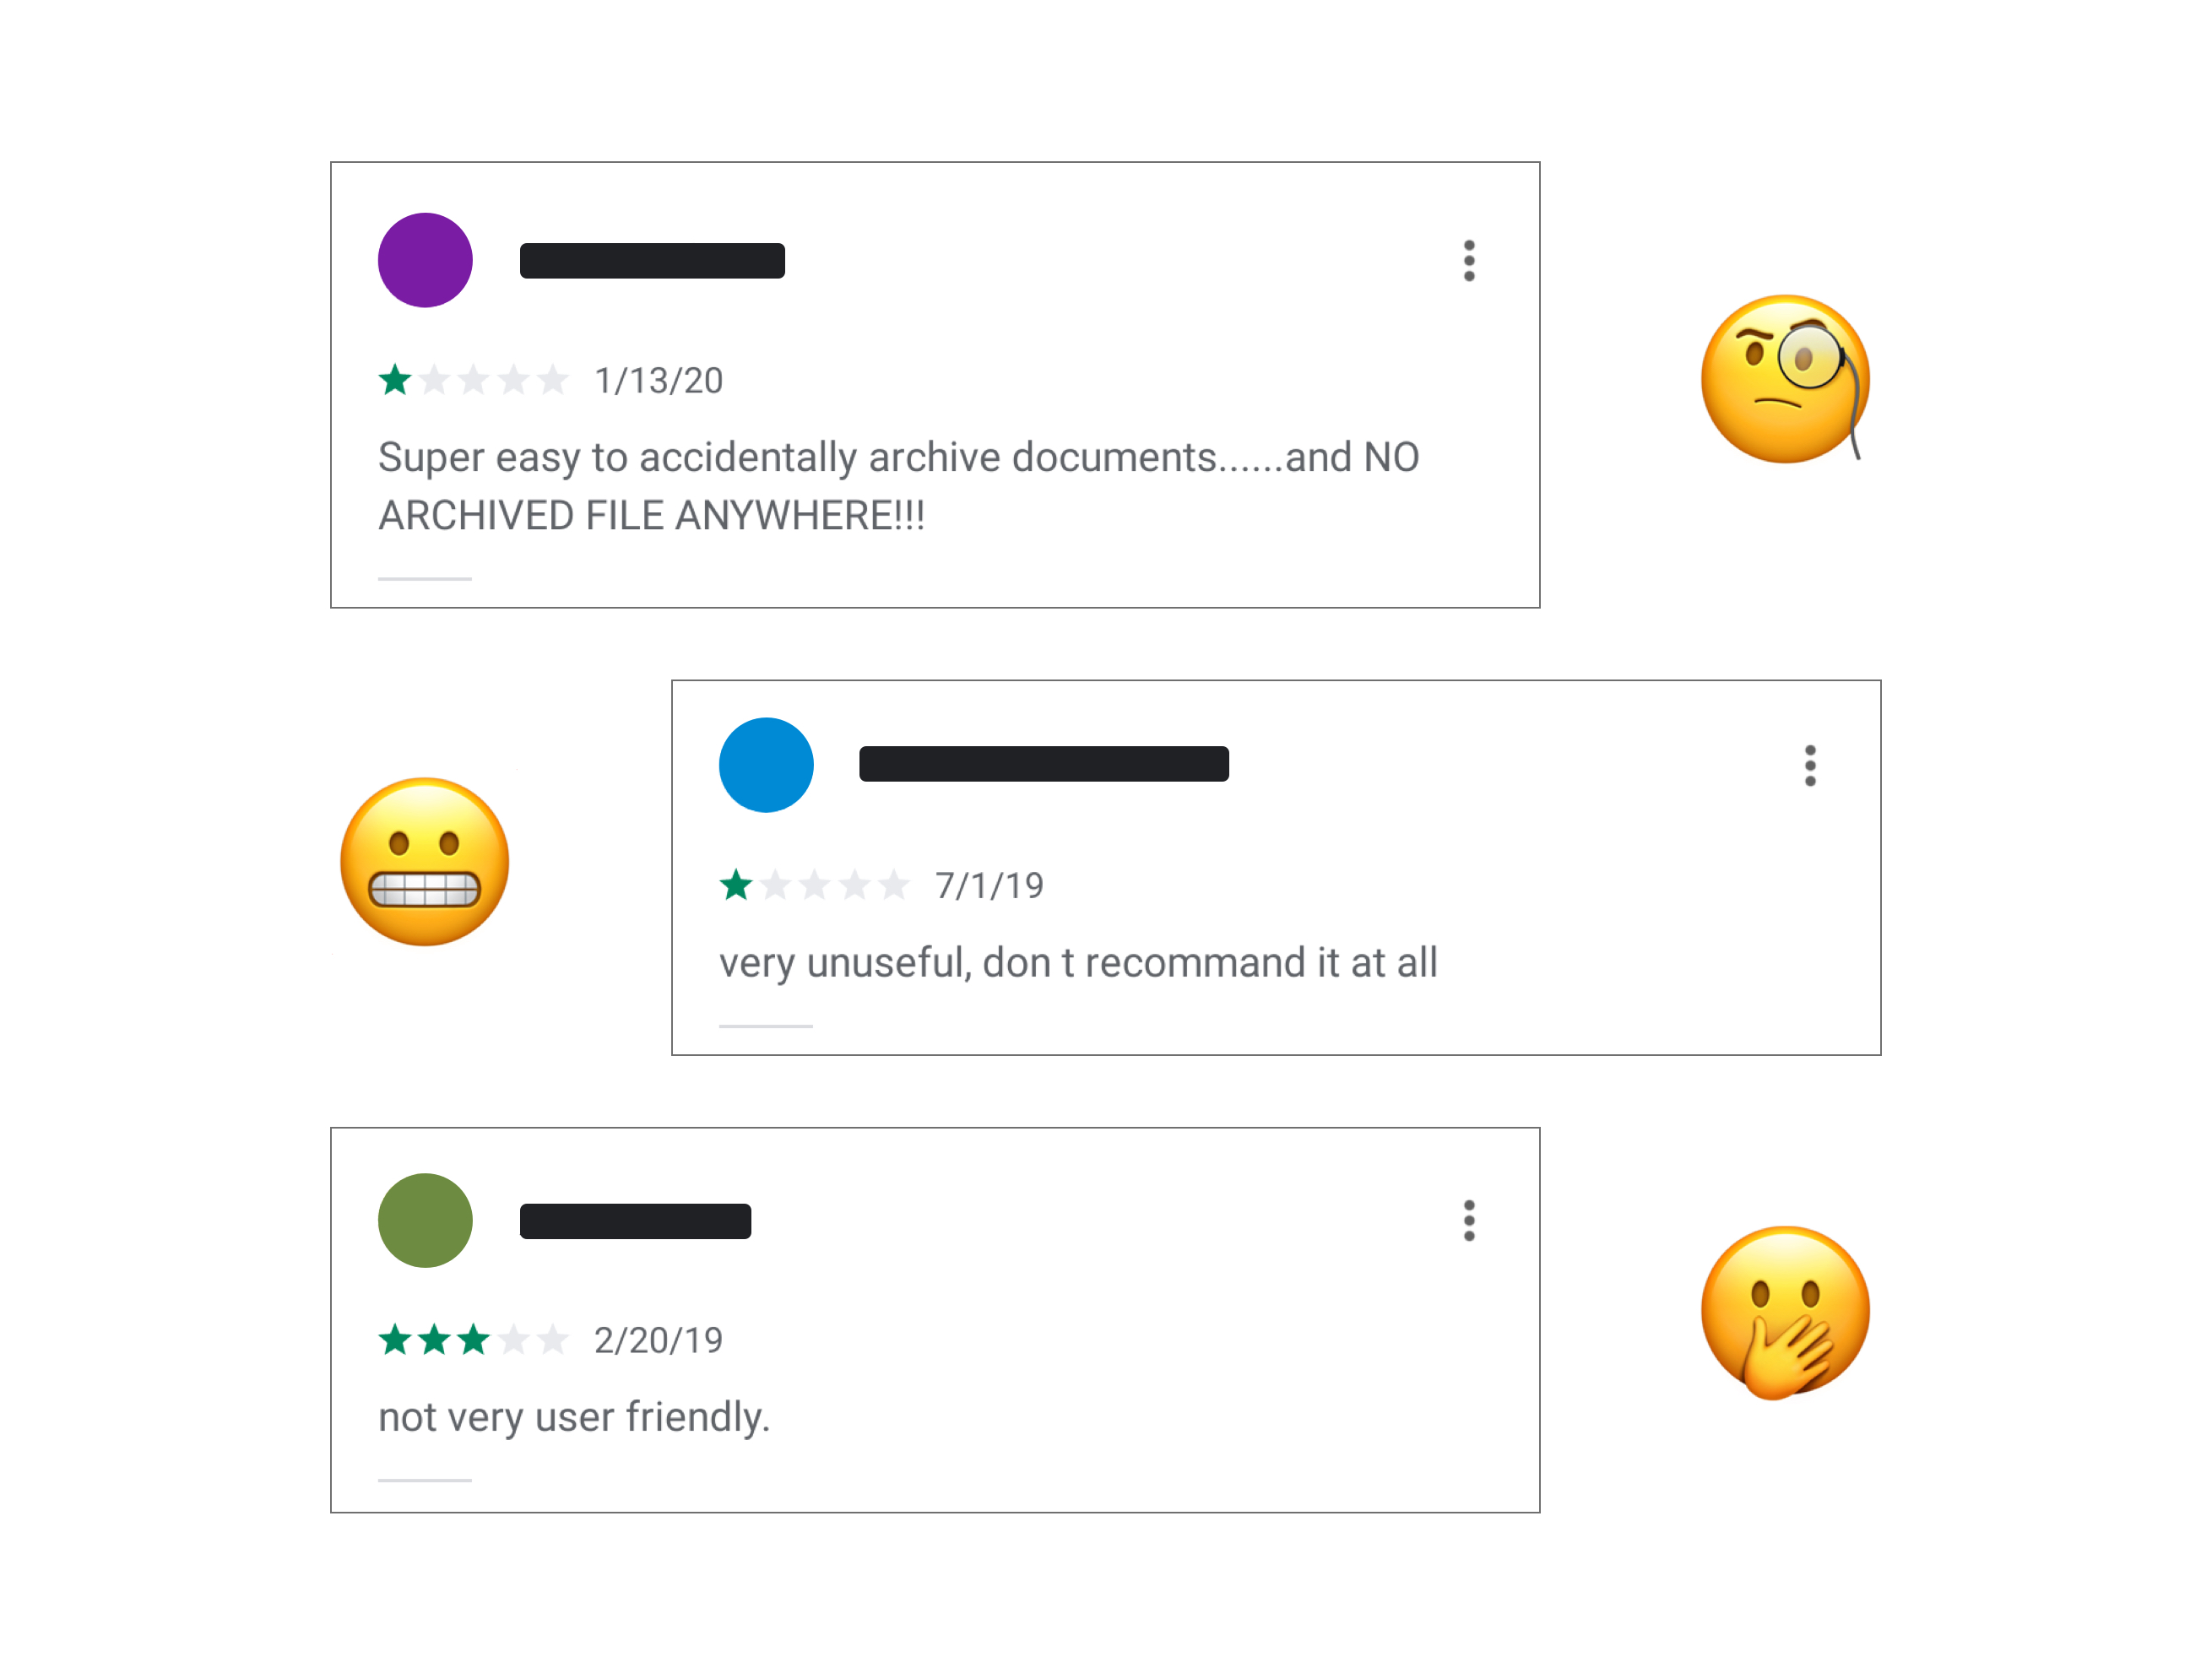 Screenshot from 3 reviews from Doccle’s page on the Google Play Store. The comments state difficulties encounter by users, for example: “not very user-friendly” a 3 stars review. “Super easy to accidentally archive documents….and no archive file anywhere” a 1 star review